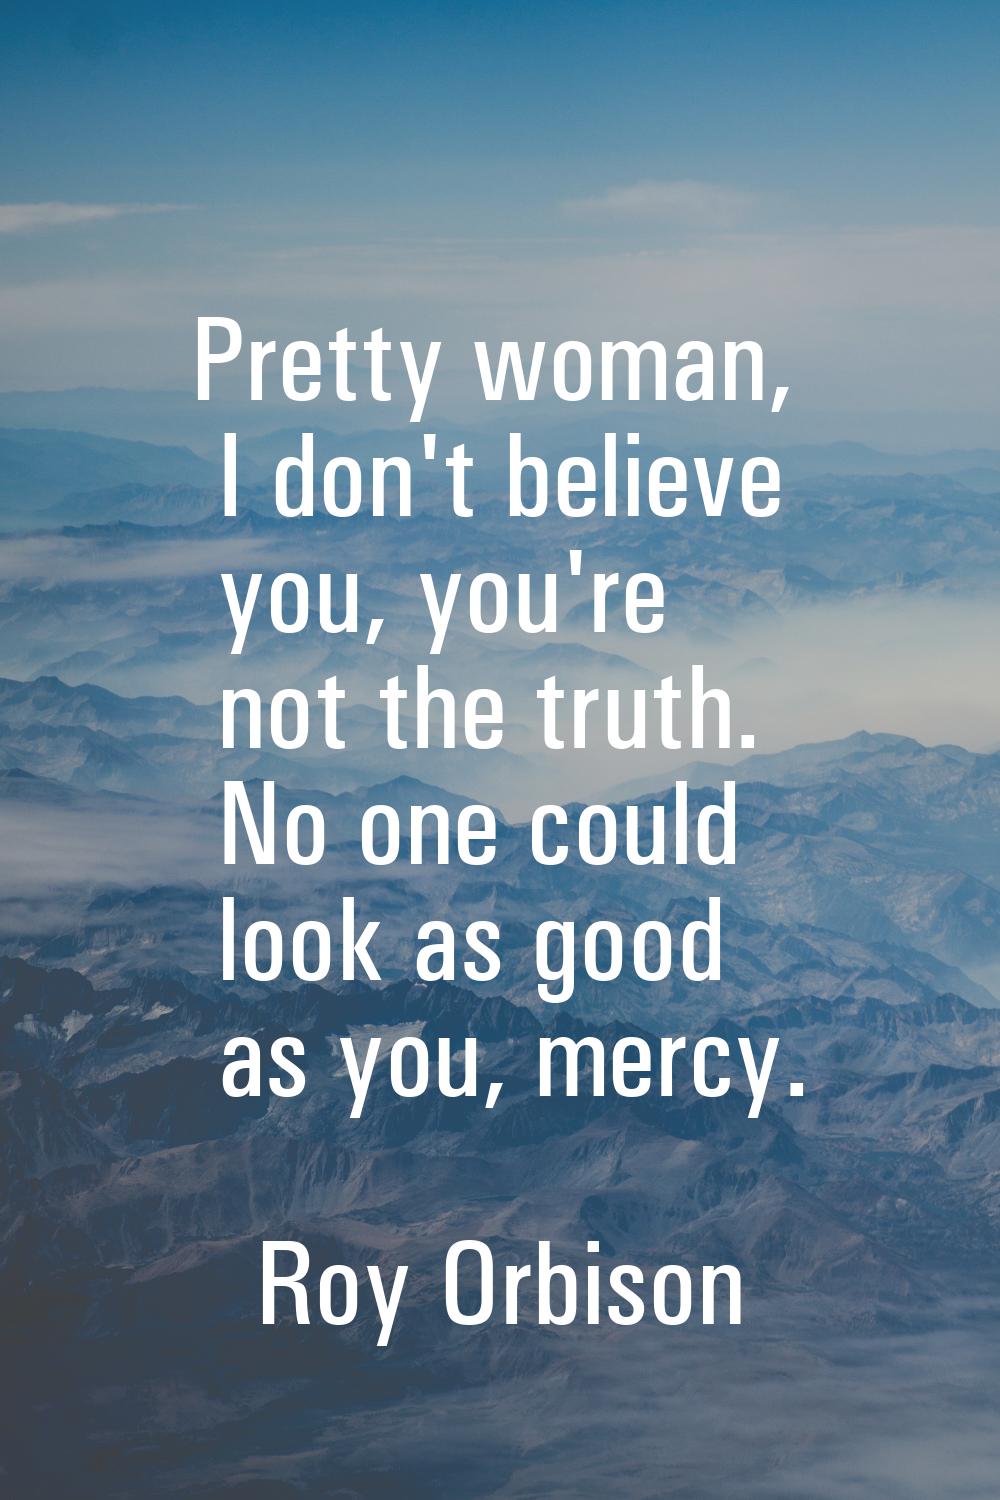 Pretty woman, I don't believe you, you're not the truth. No one could look as good as you, mercy.